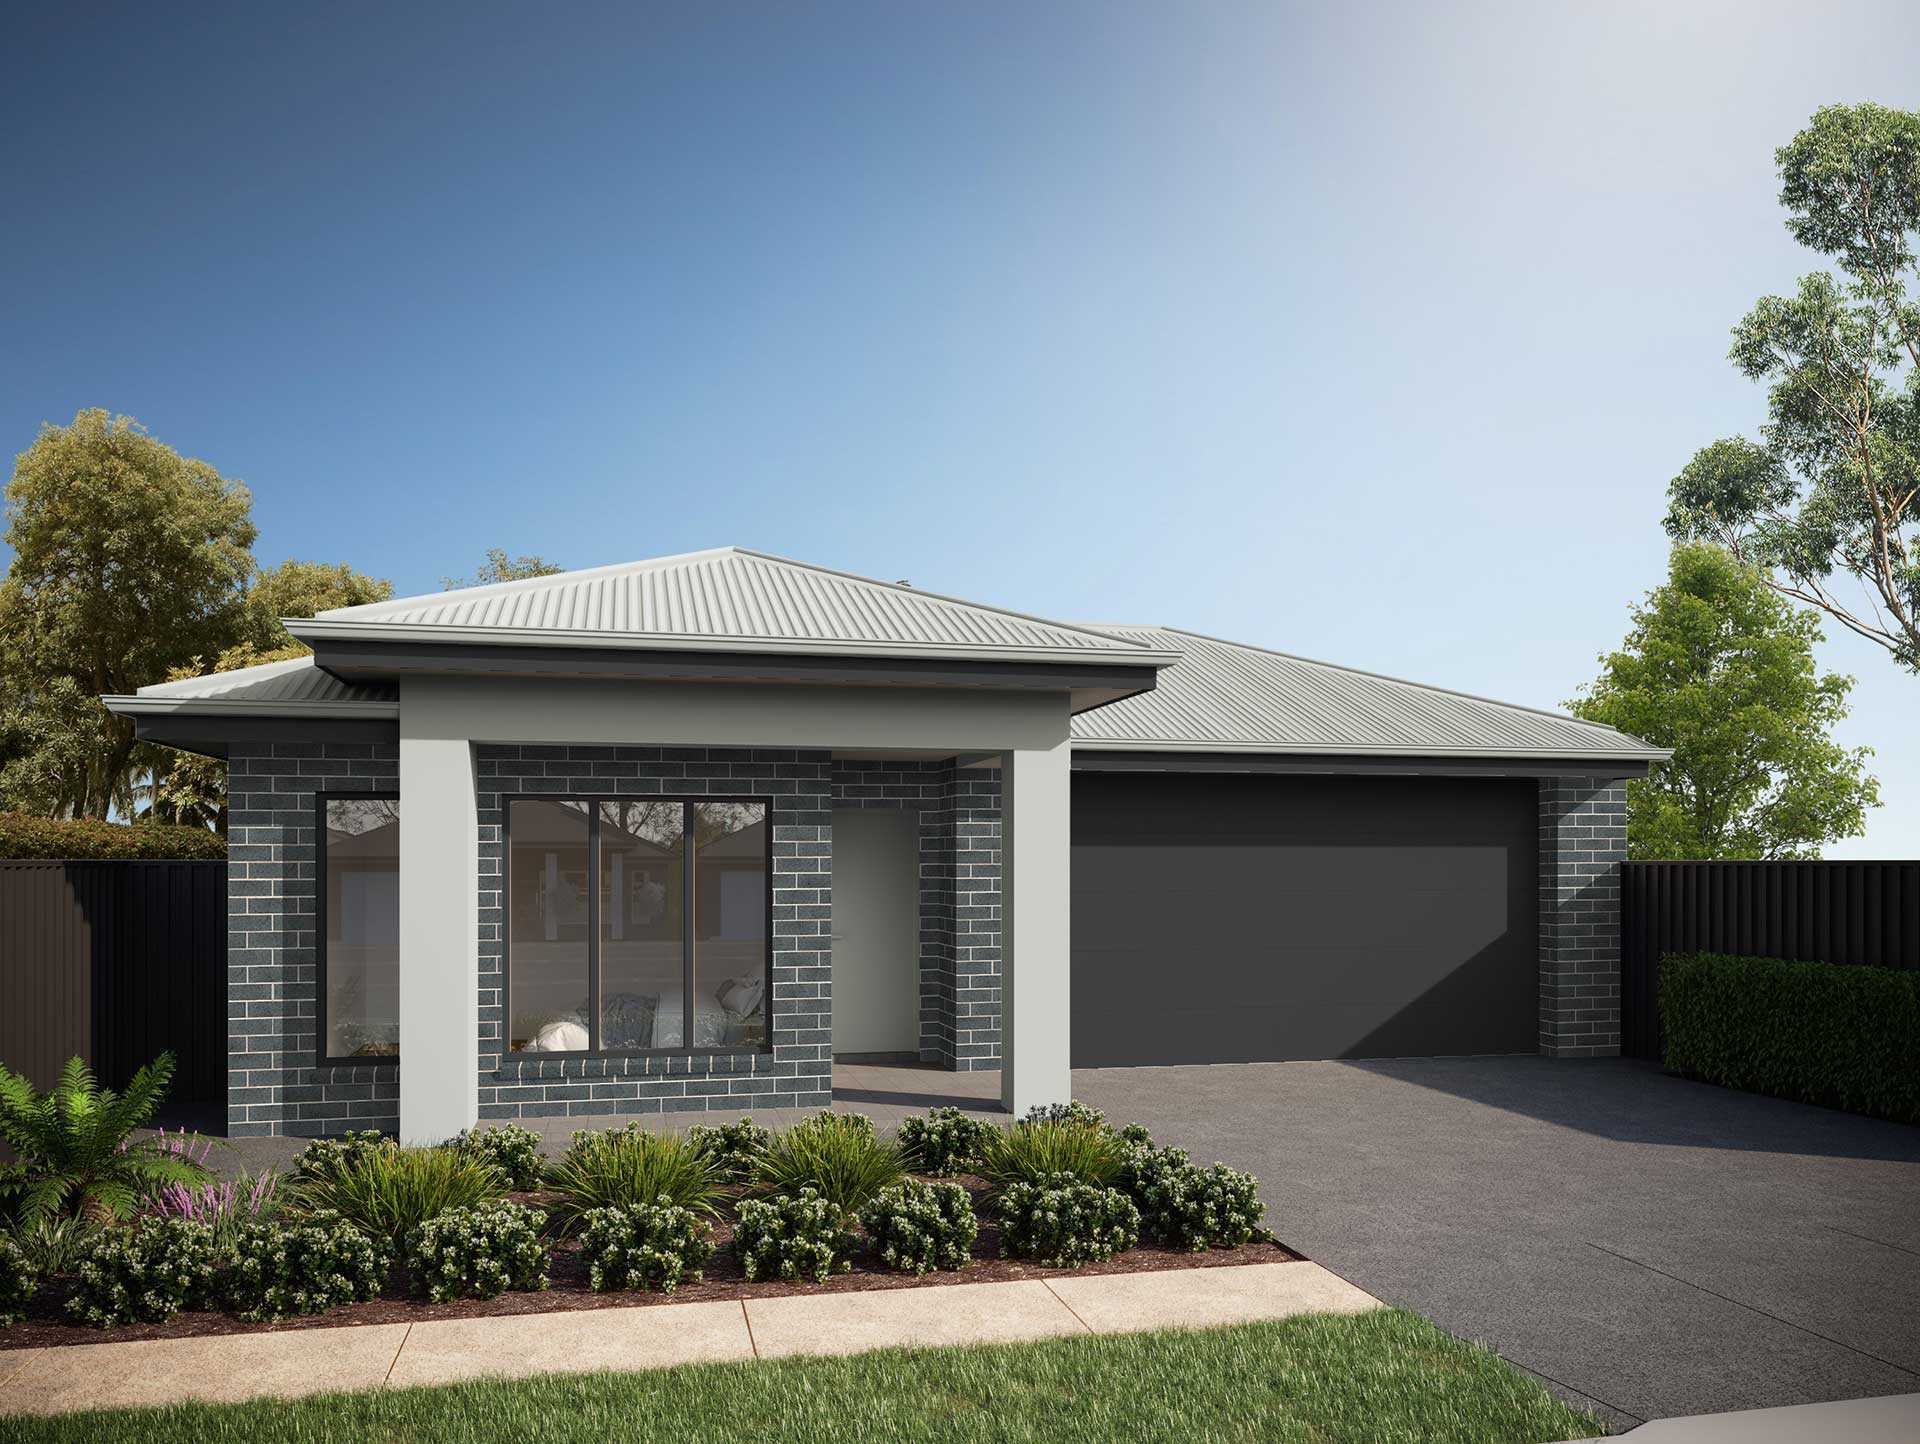 Lot 238 Bacca Drive Angle Vale (The Entrance)